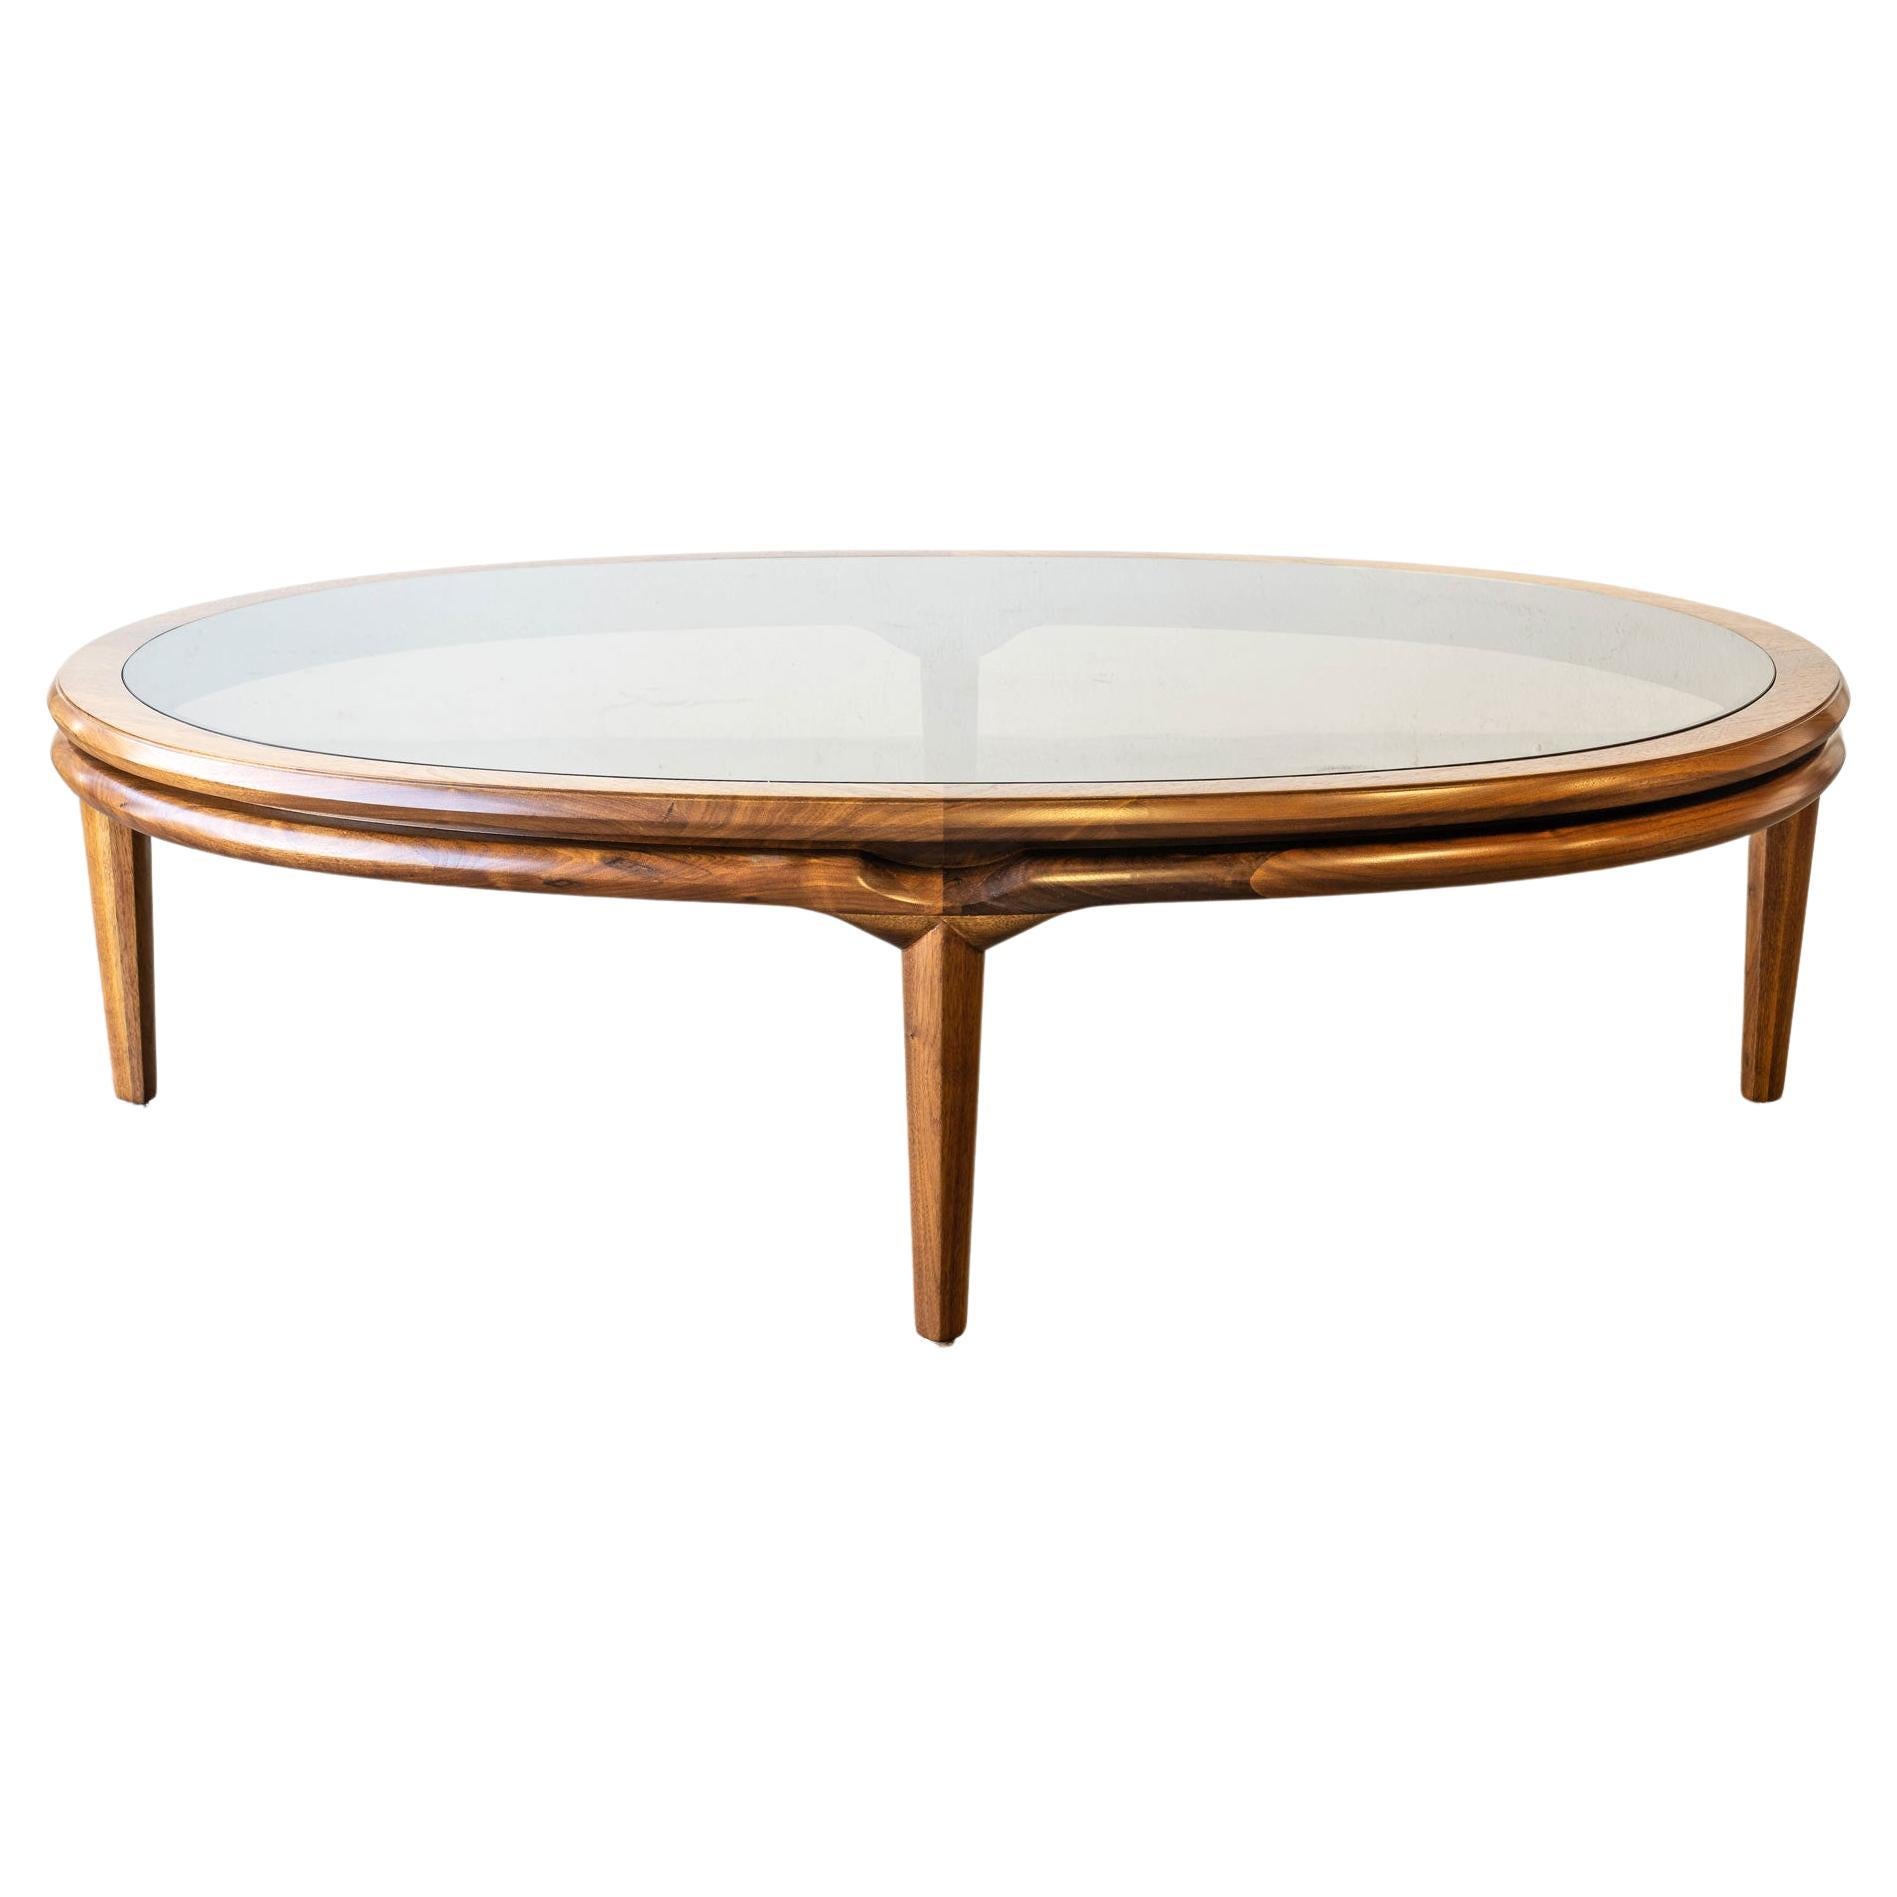 Mid-Century Modern Monteverdi Young Smoked Glass Walnut Coffee Table
Elevate your living space with a touch of vintage sophistication! Introducing this fully refinished, stylish smoked glass & walnut coffee table by Maurice Bailey for Monteverdi